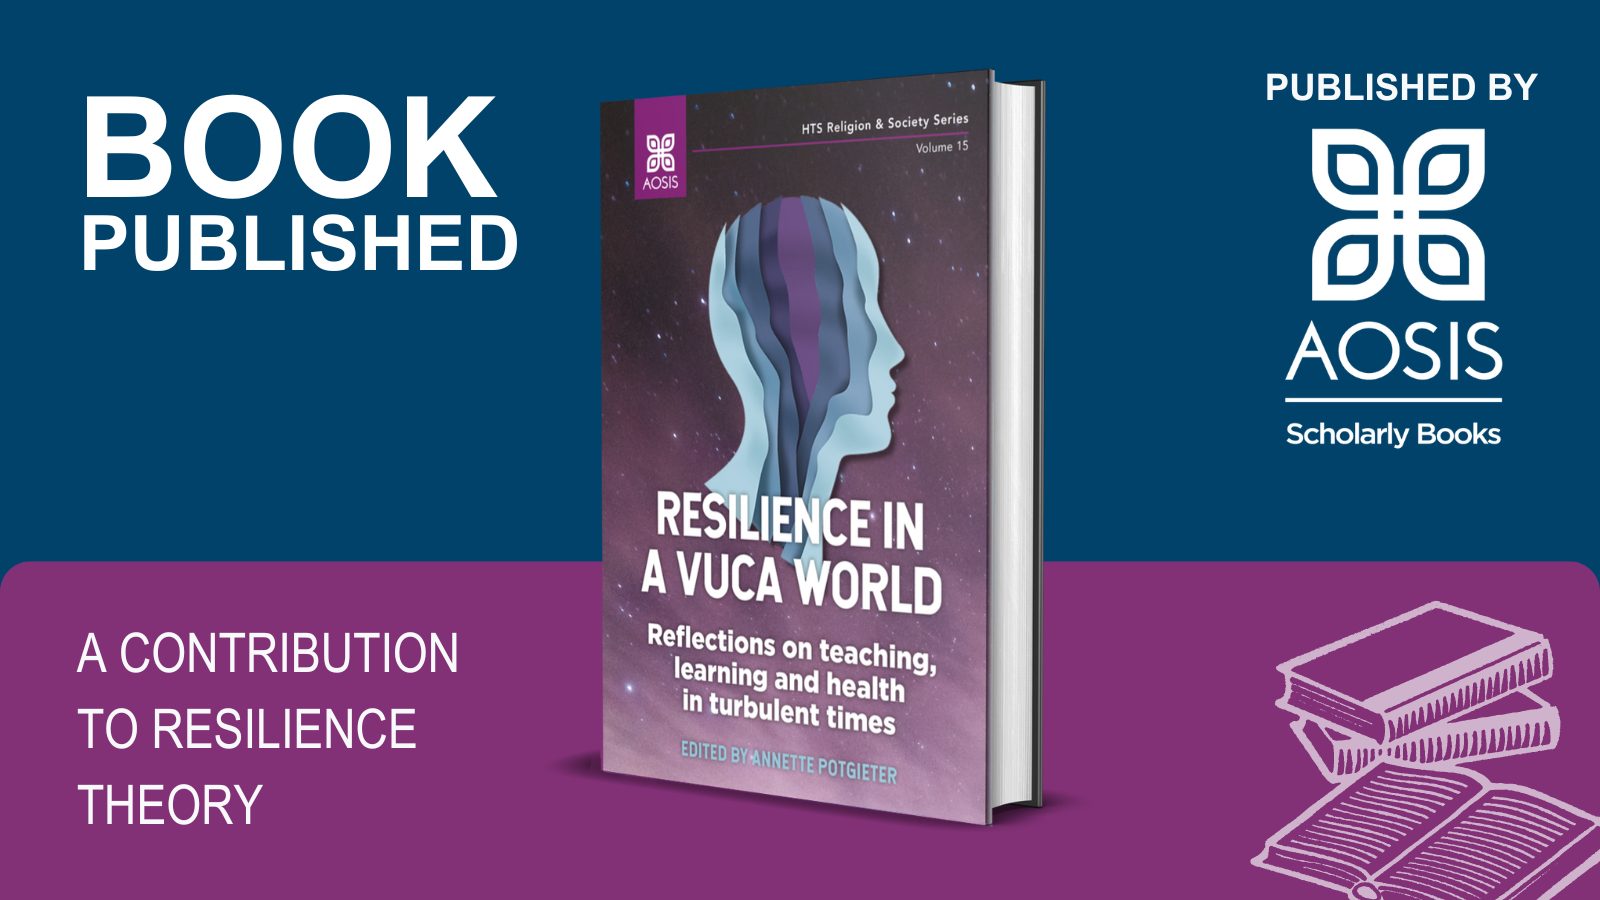 AOSIS Books publishes ‘Resilience in a VUCA world’ by Annette Potgieter